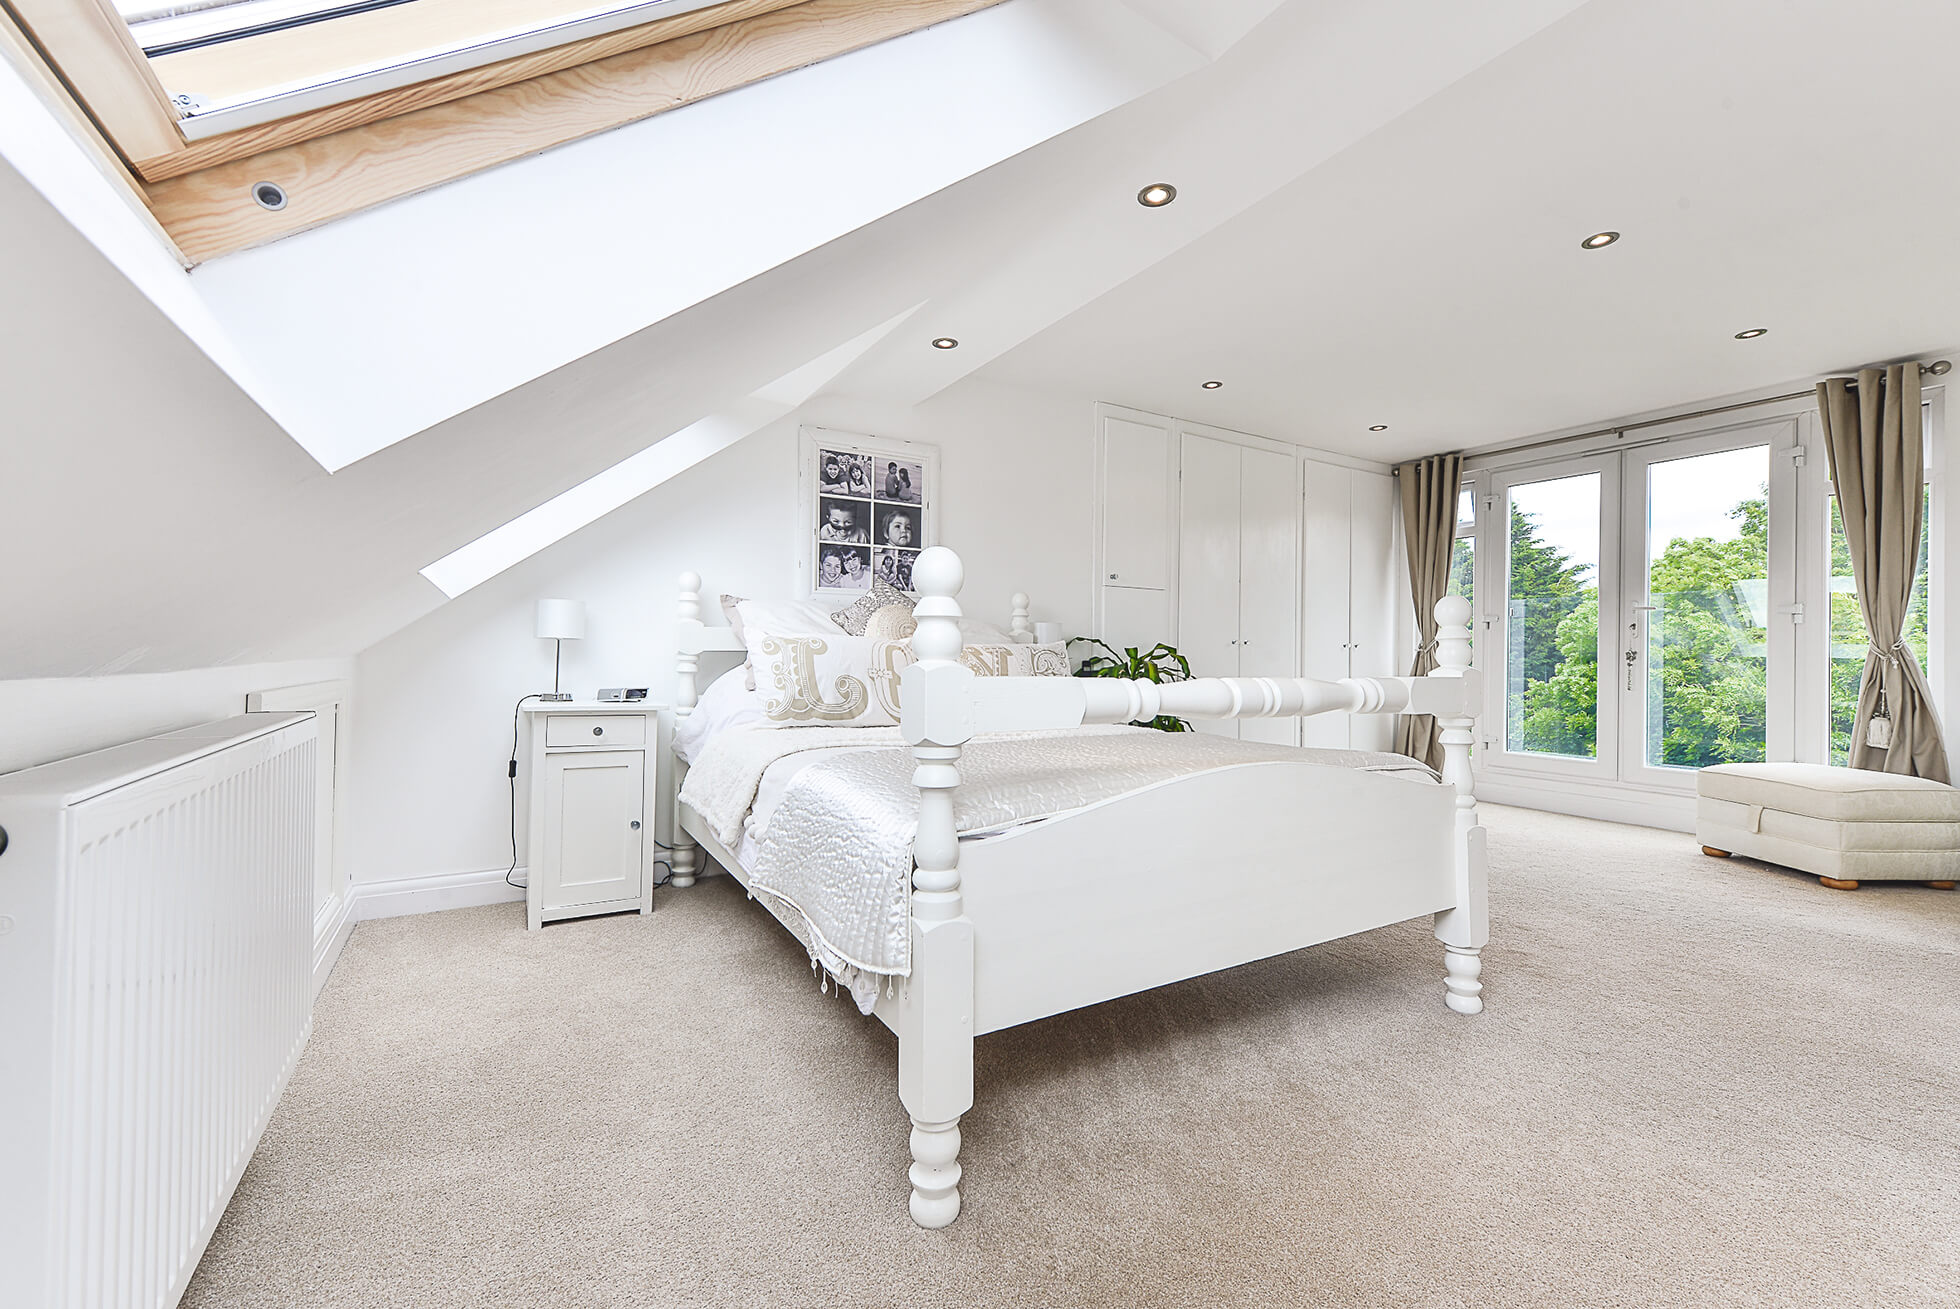 Do you have a question about converting your Loft in St Albans? Here are the most popular questions asked by our clients.